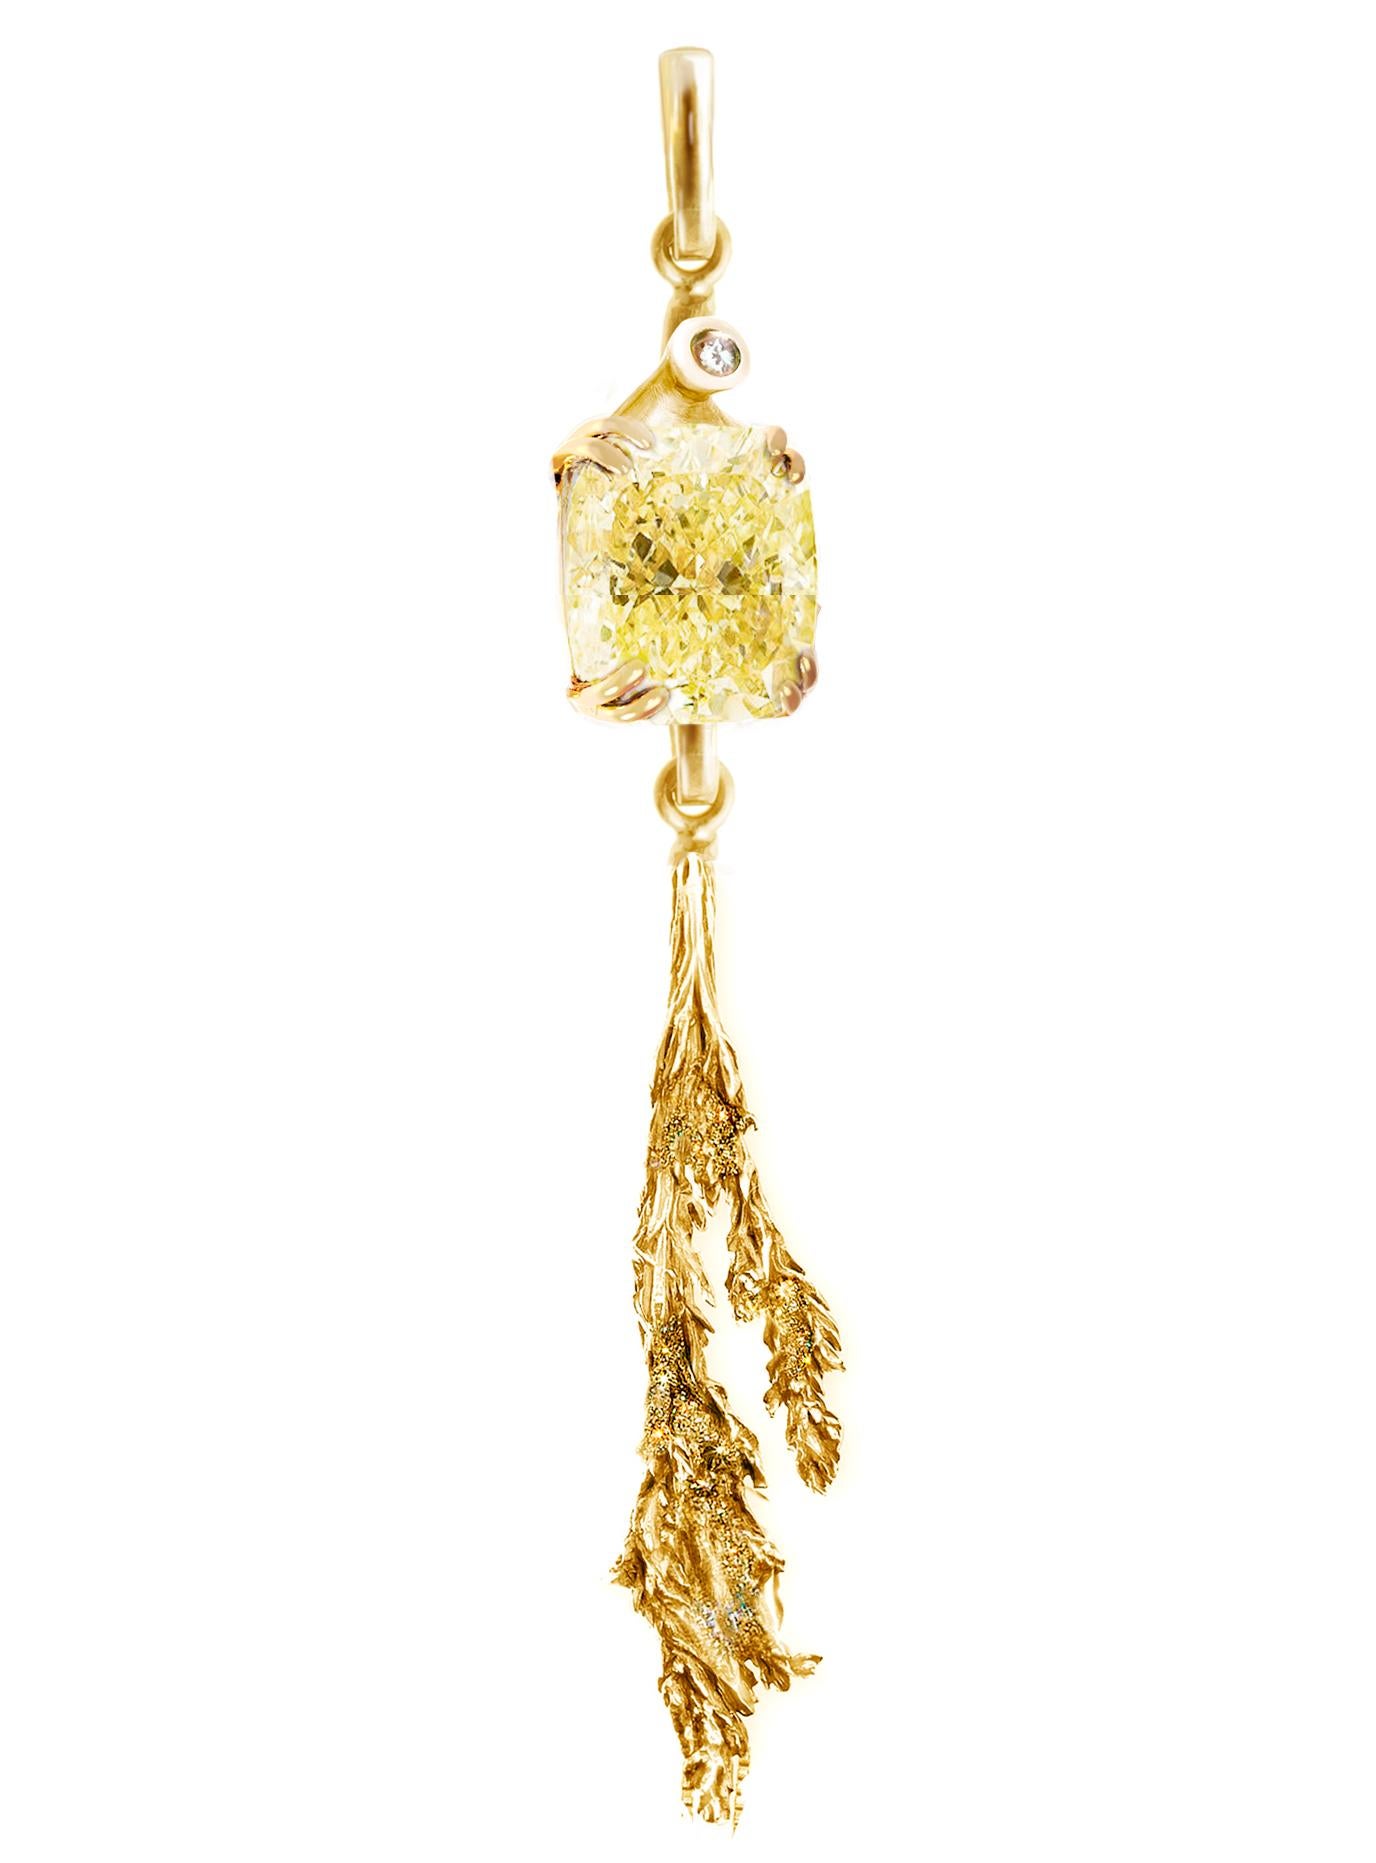 The Juniper contemporary pendant necklace (7 cm) is crafted from 18 karat yellow gold and features a certified cushion cut yellow diamond (SI, Y-Z, 2.02 carats in total). The collection was previously featured in Vogue UA and was mentioned in the